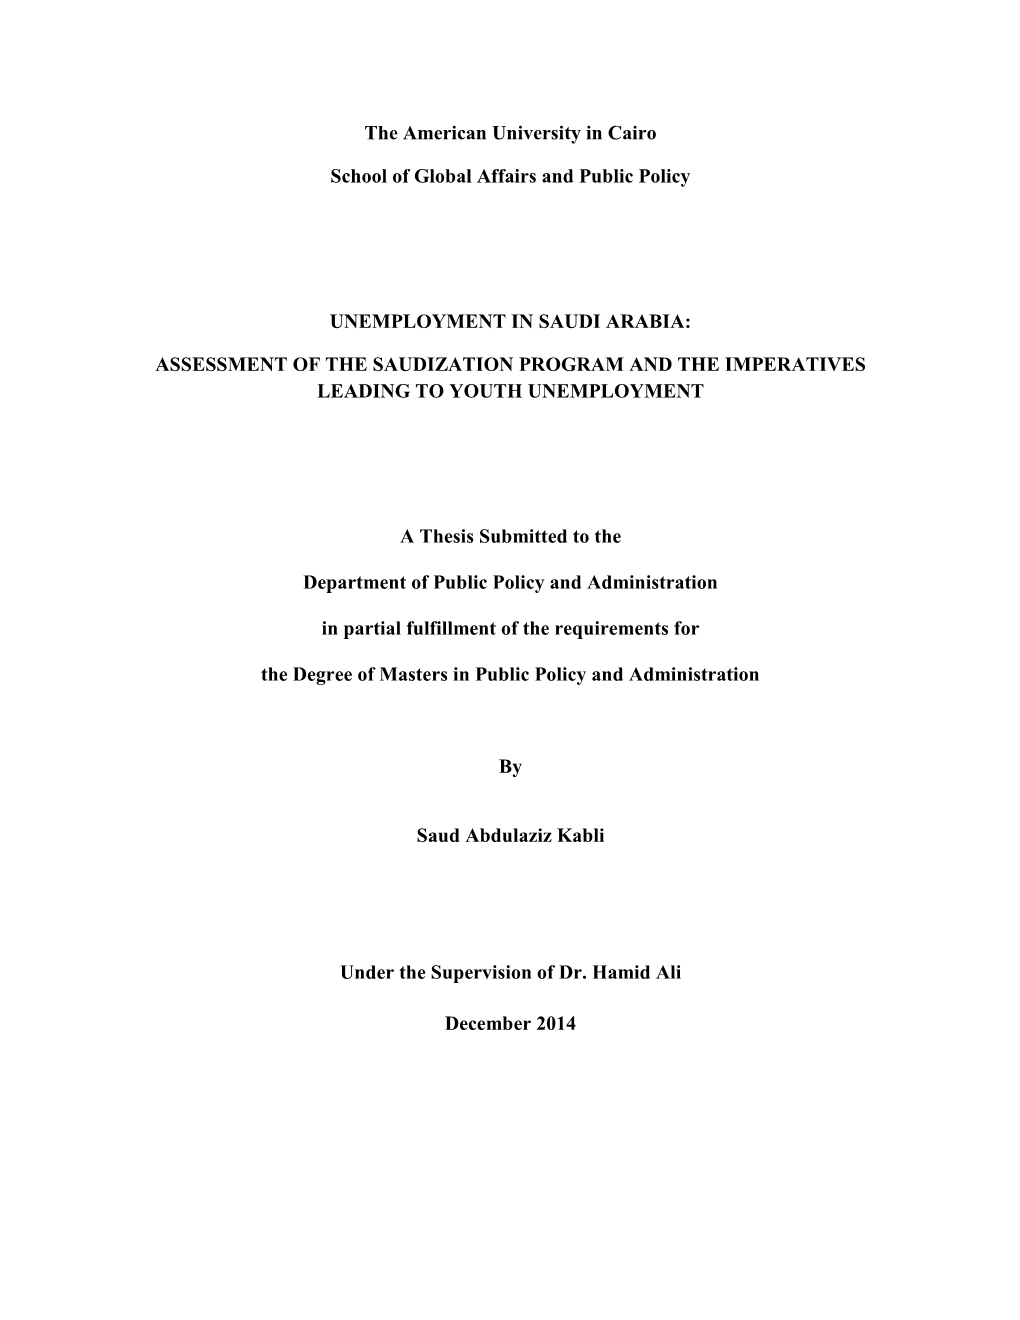 UNEMPLOYMENT in SAUDI ARABIA: ASSESSMENT of the SAUDIZATION PROGRAM and the IMPERATIVES LEADING to YOUTH UNEMPLOYMENT a Thesis Submitted By